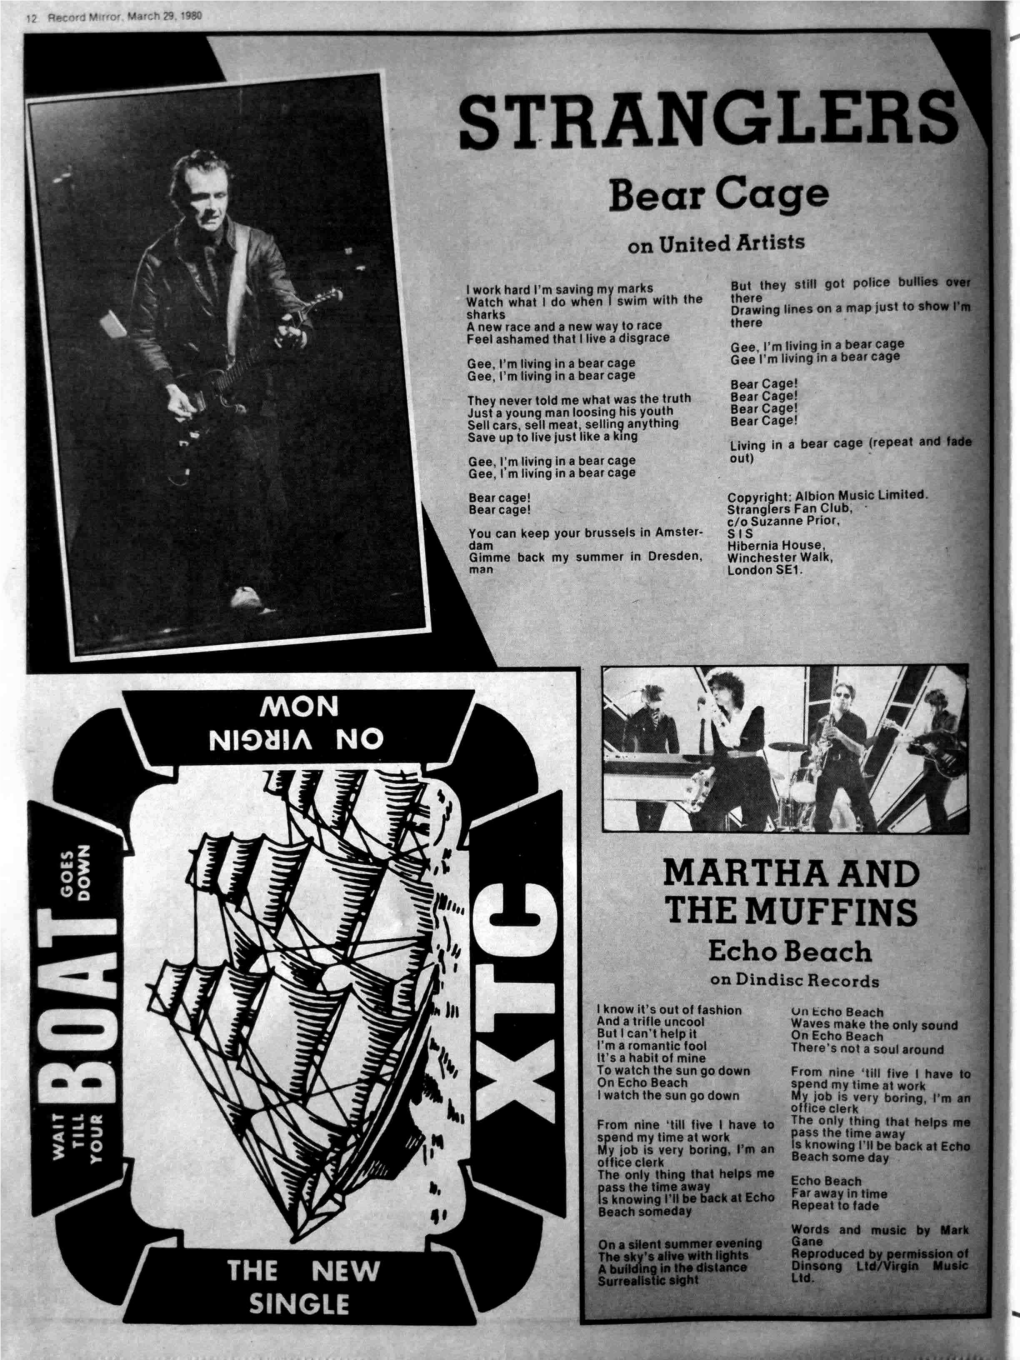 STRANGLERS Bear Cage on United Artists